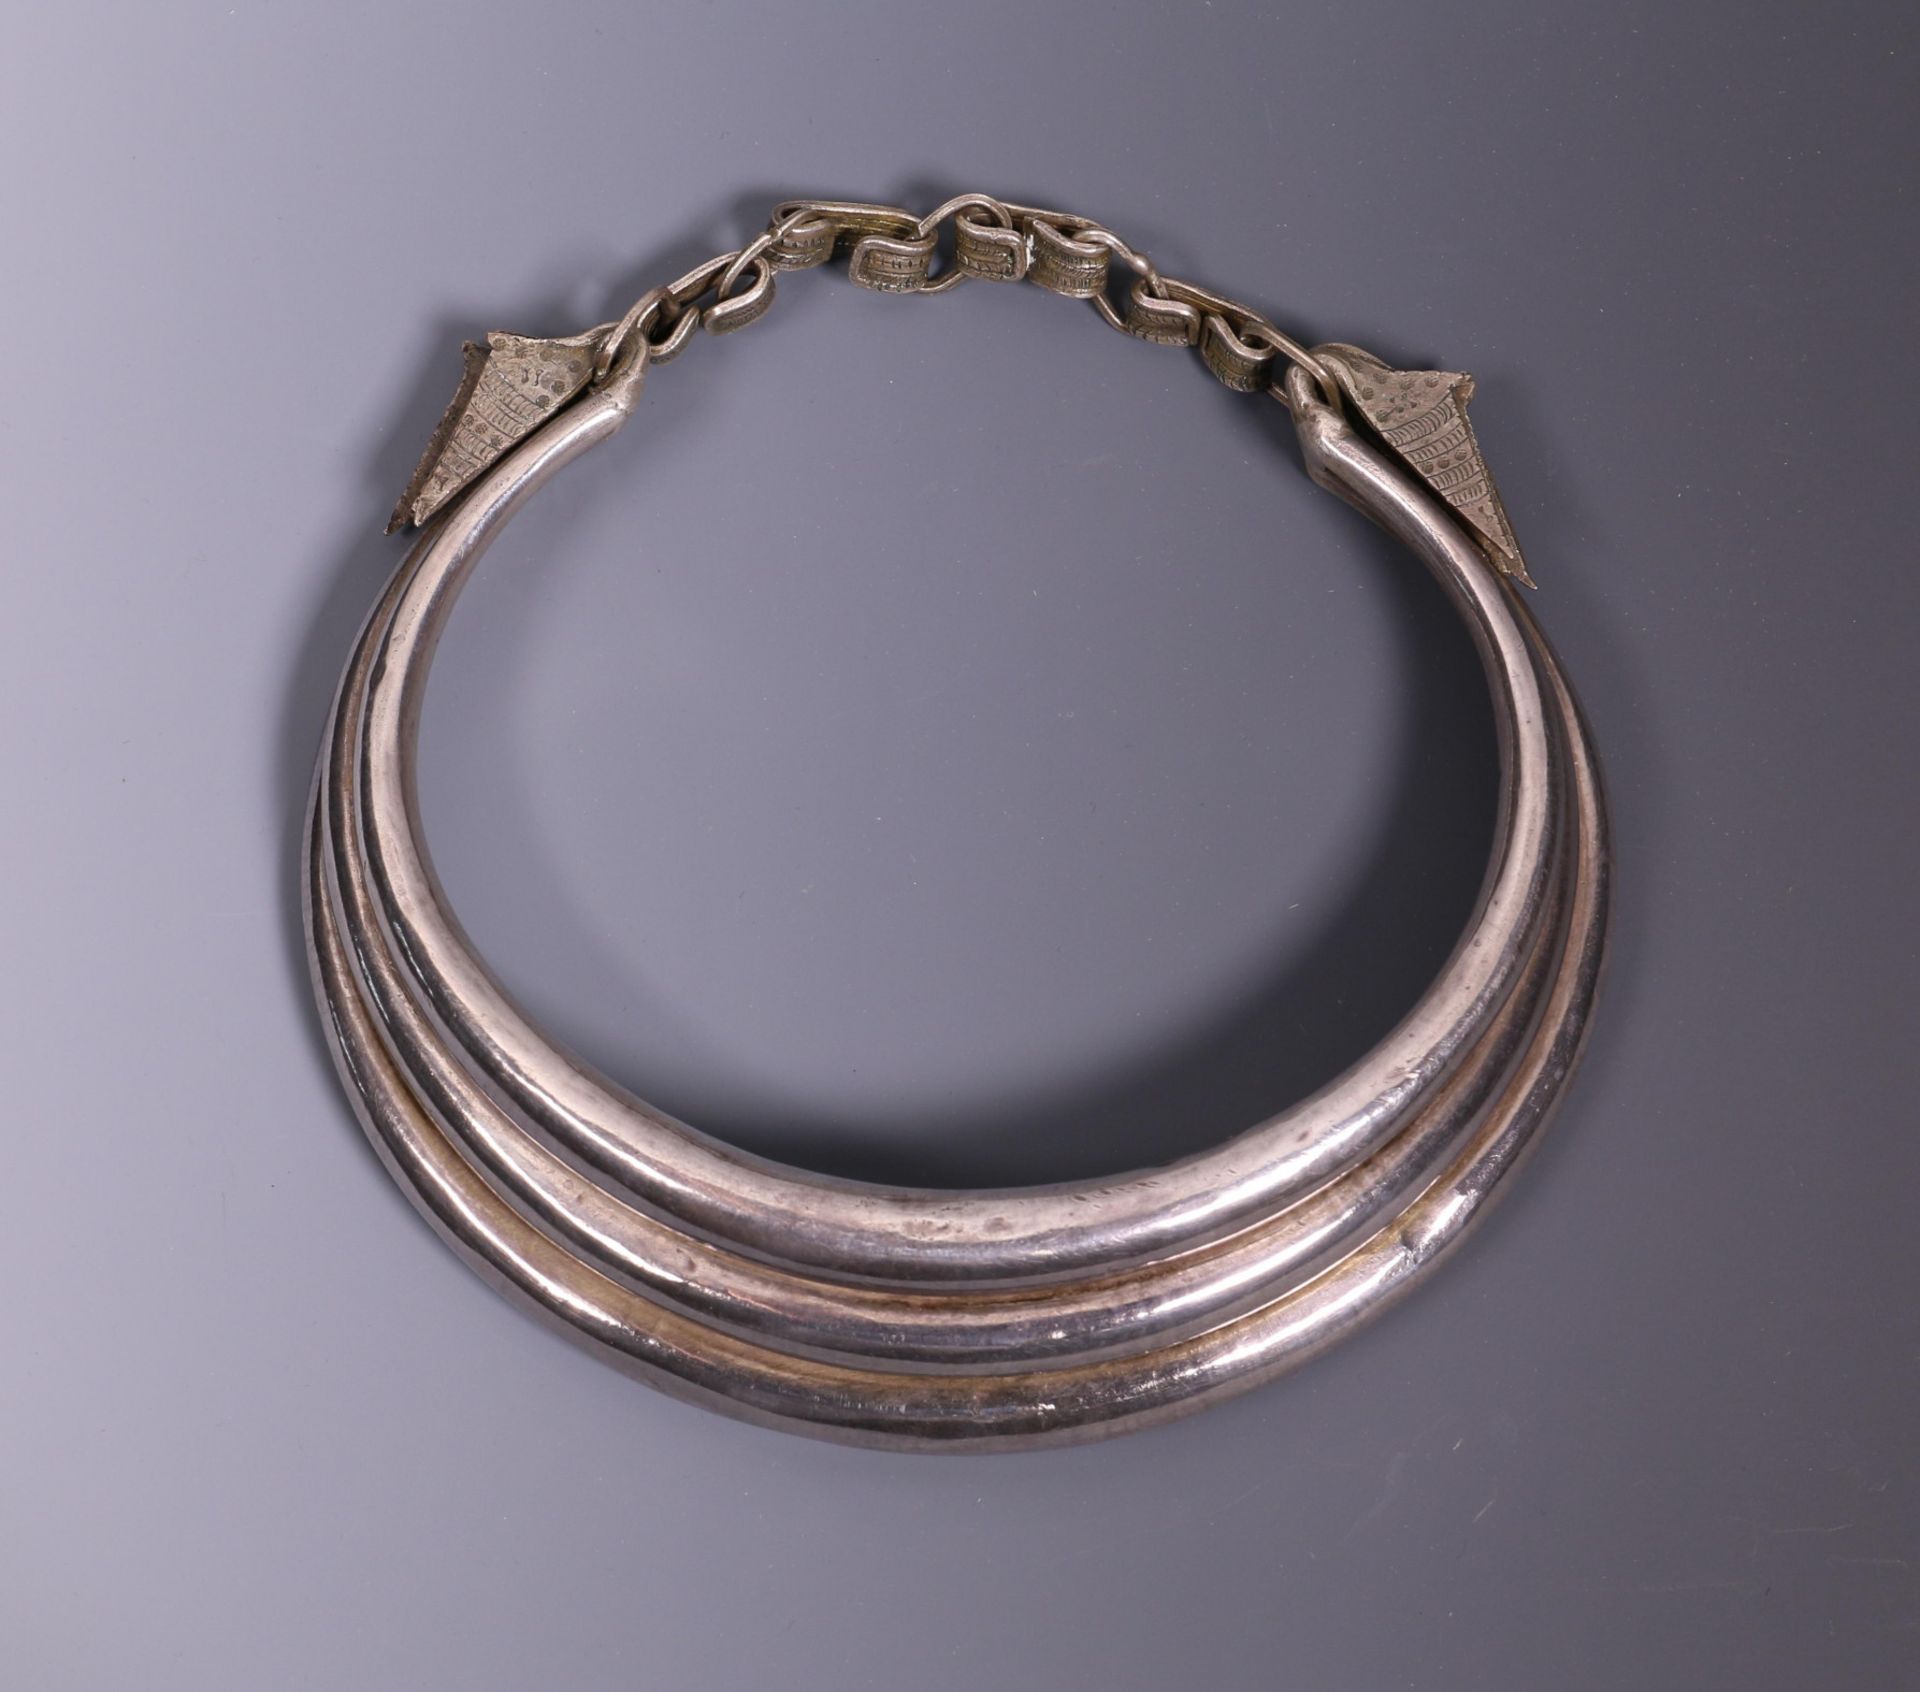 China, silver alloy necklace in three hollow bands